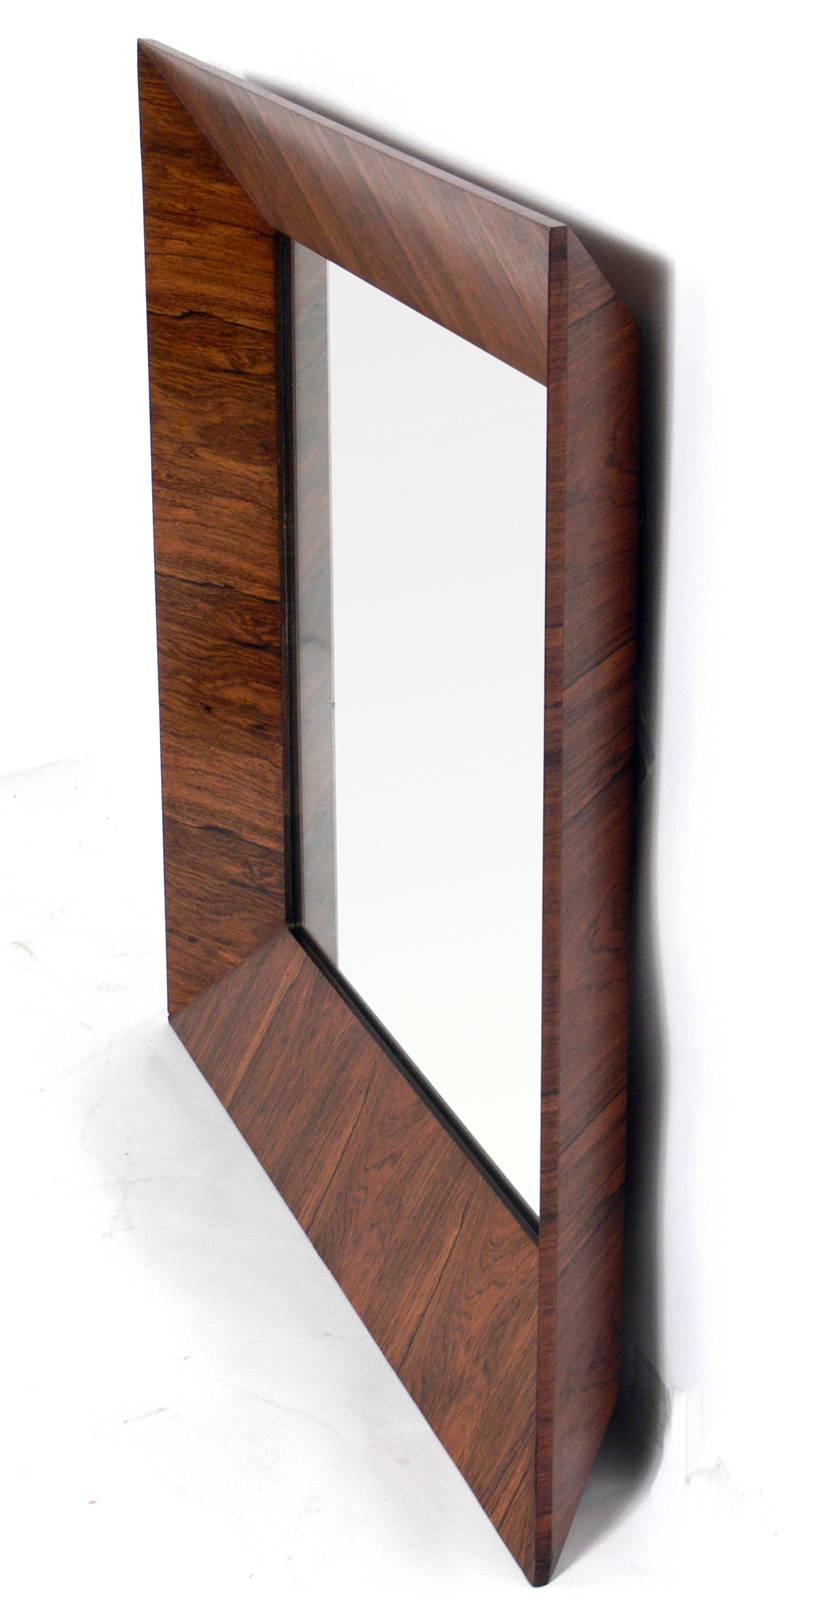 Rosewood mirror designed by Edward Wormley for Dunbar, American, circa 1950s. Crisp, deeply angled design. updated